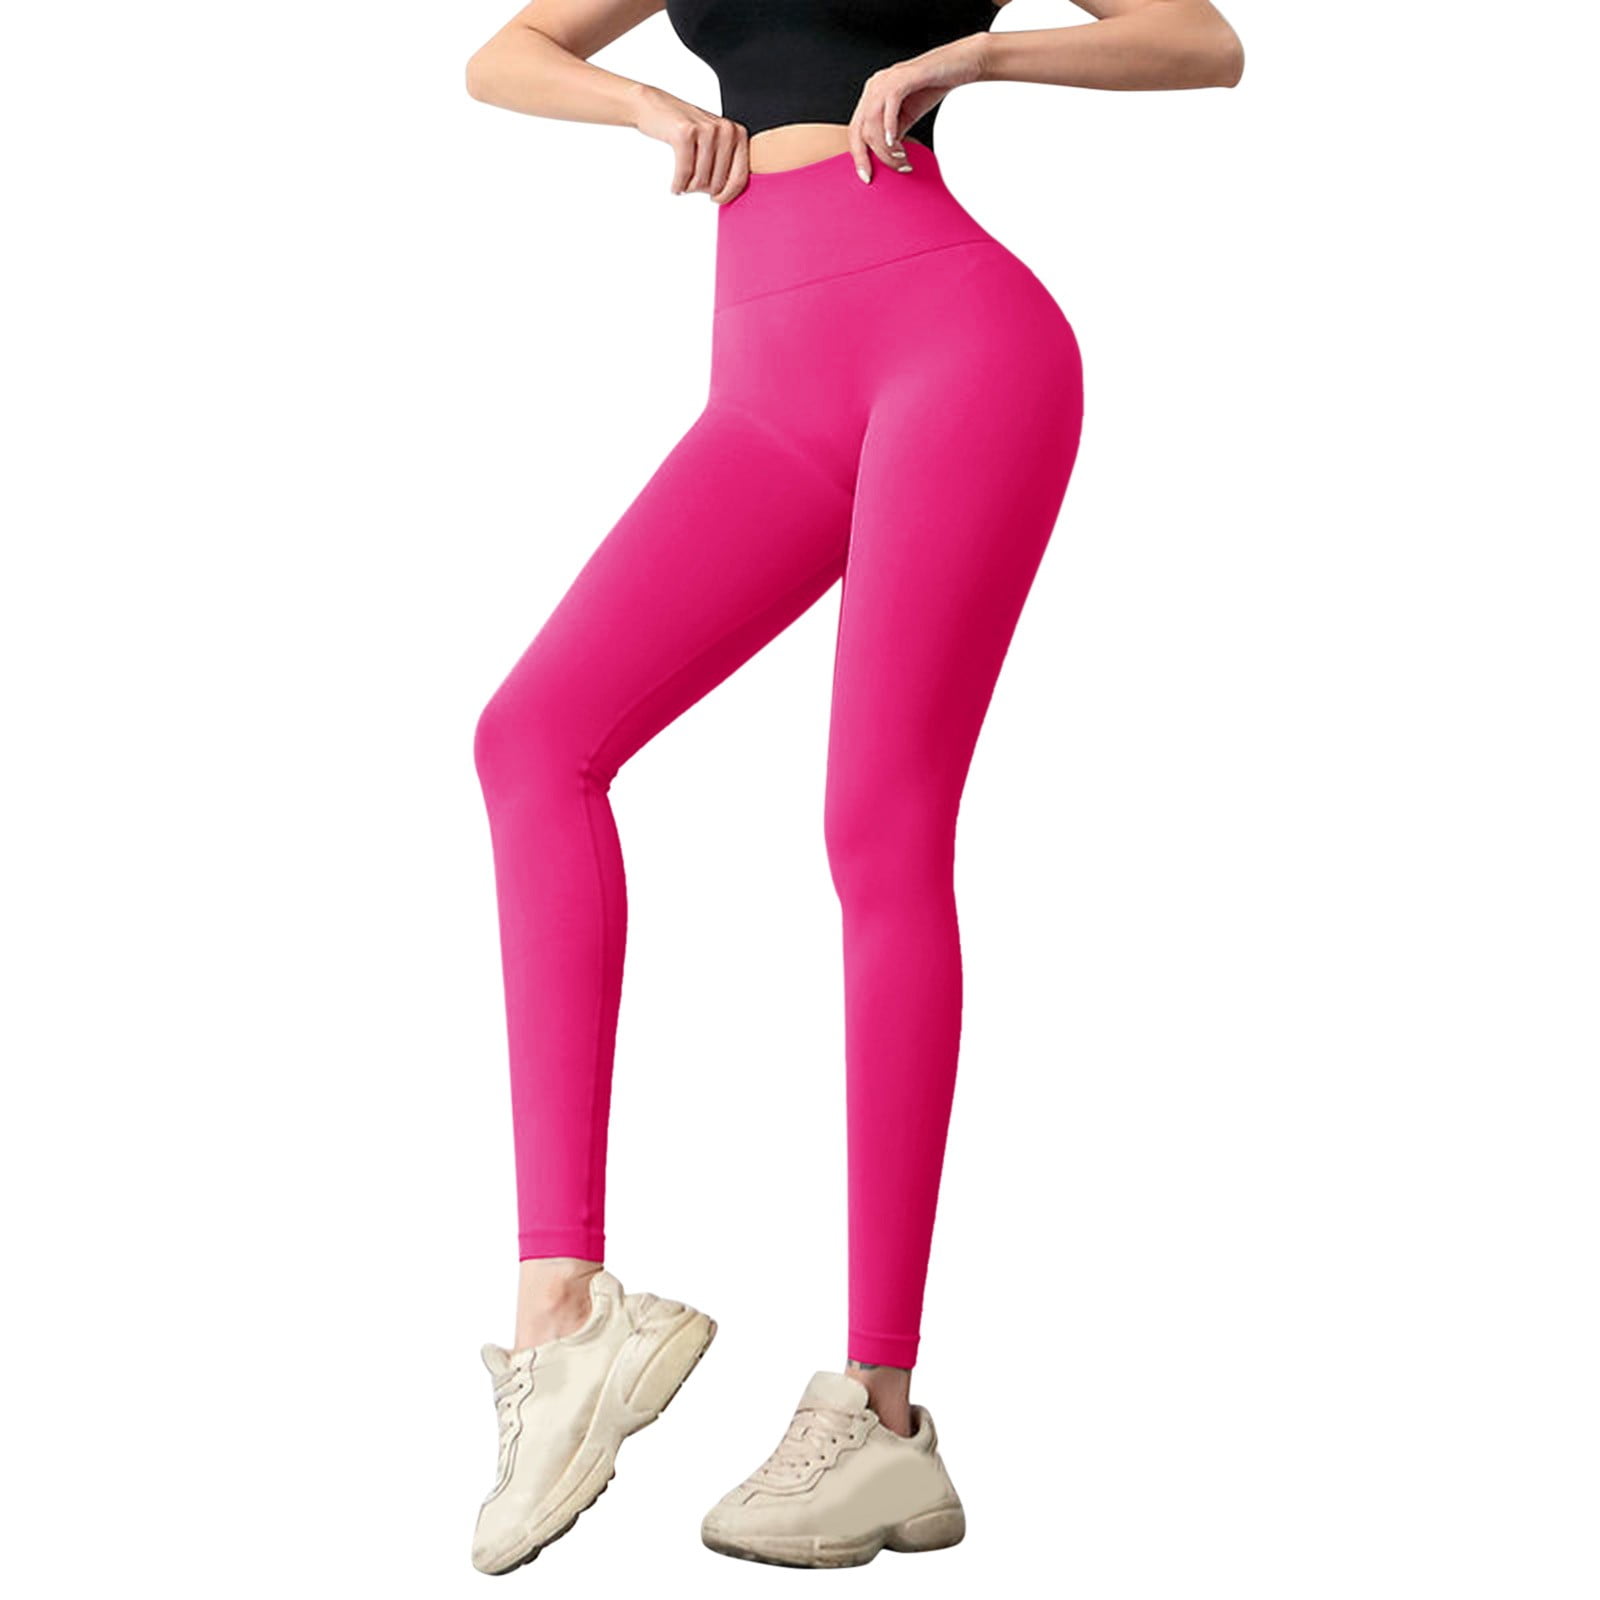 RYDCOT Womens Stretch Yoga Leggings Fitness Running Gym Sports Full Length  Active Pants Pink XS